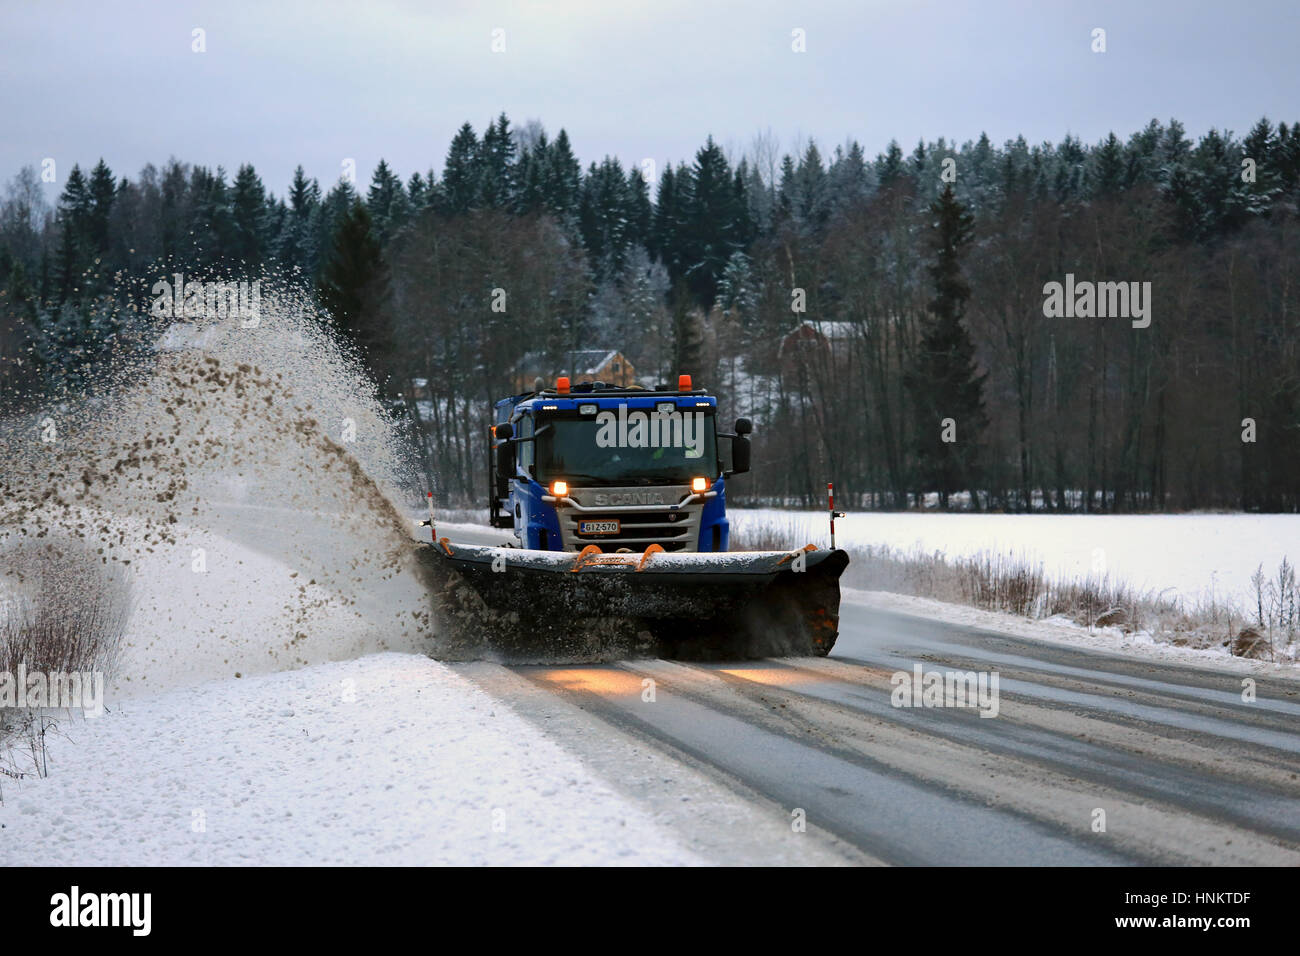 SALO, FINLAND - JANUARY 14: Scania truck equipped with snowplow removes snow and sleet from highway in South of Finland on a cloudy aftermoon in winte Stock Photo